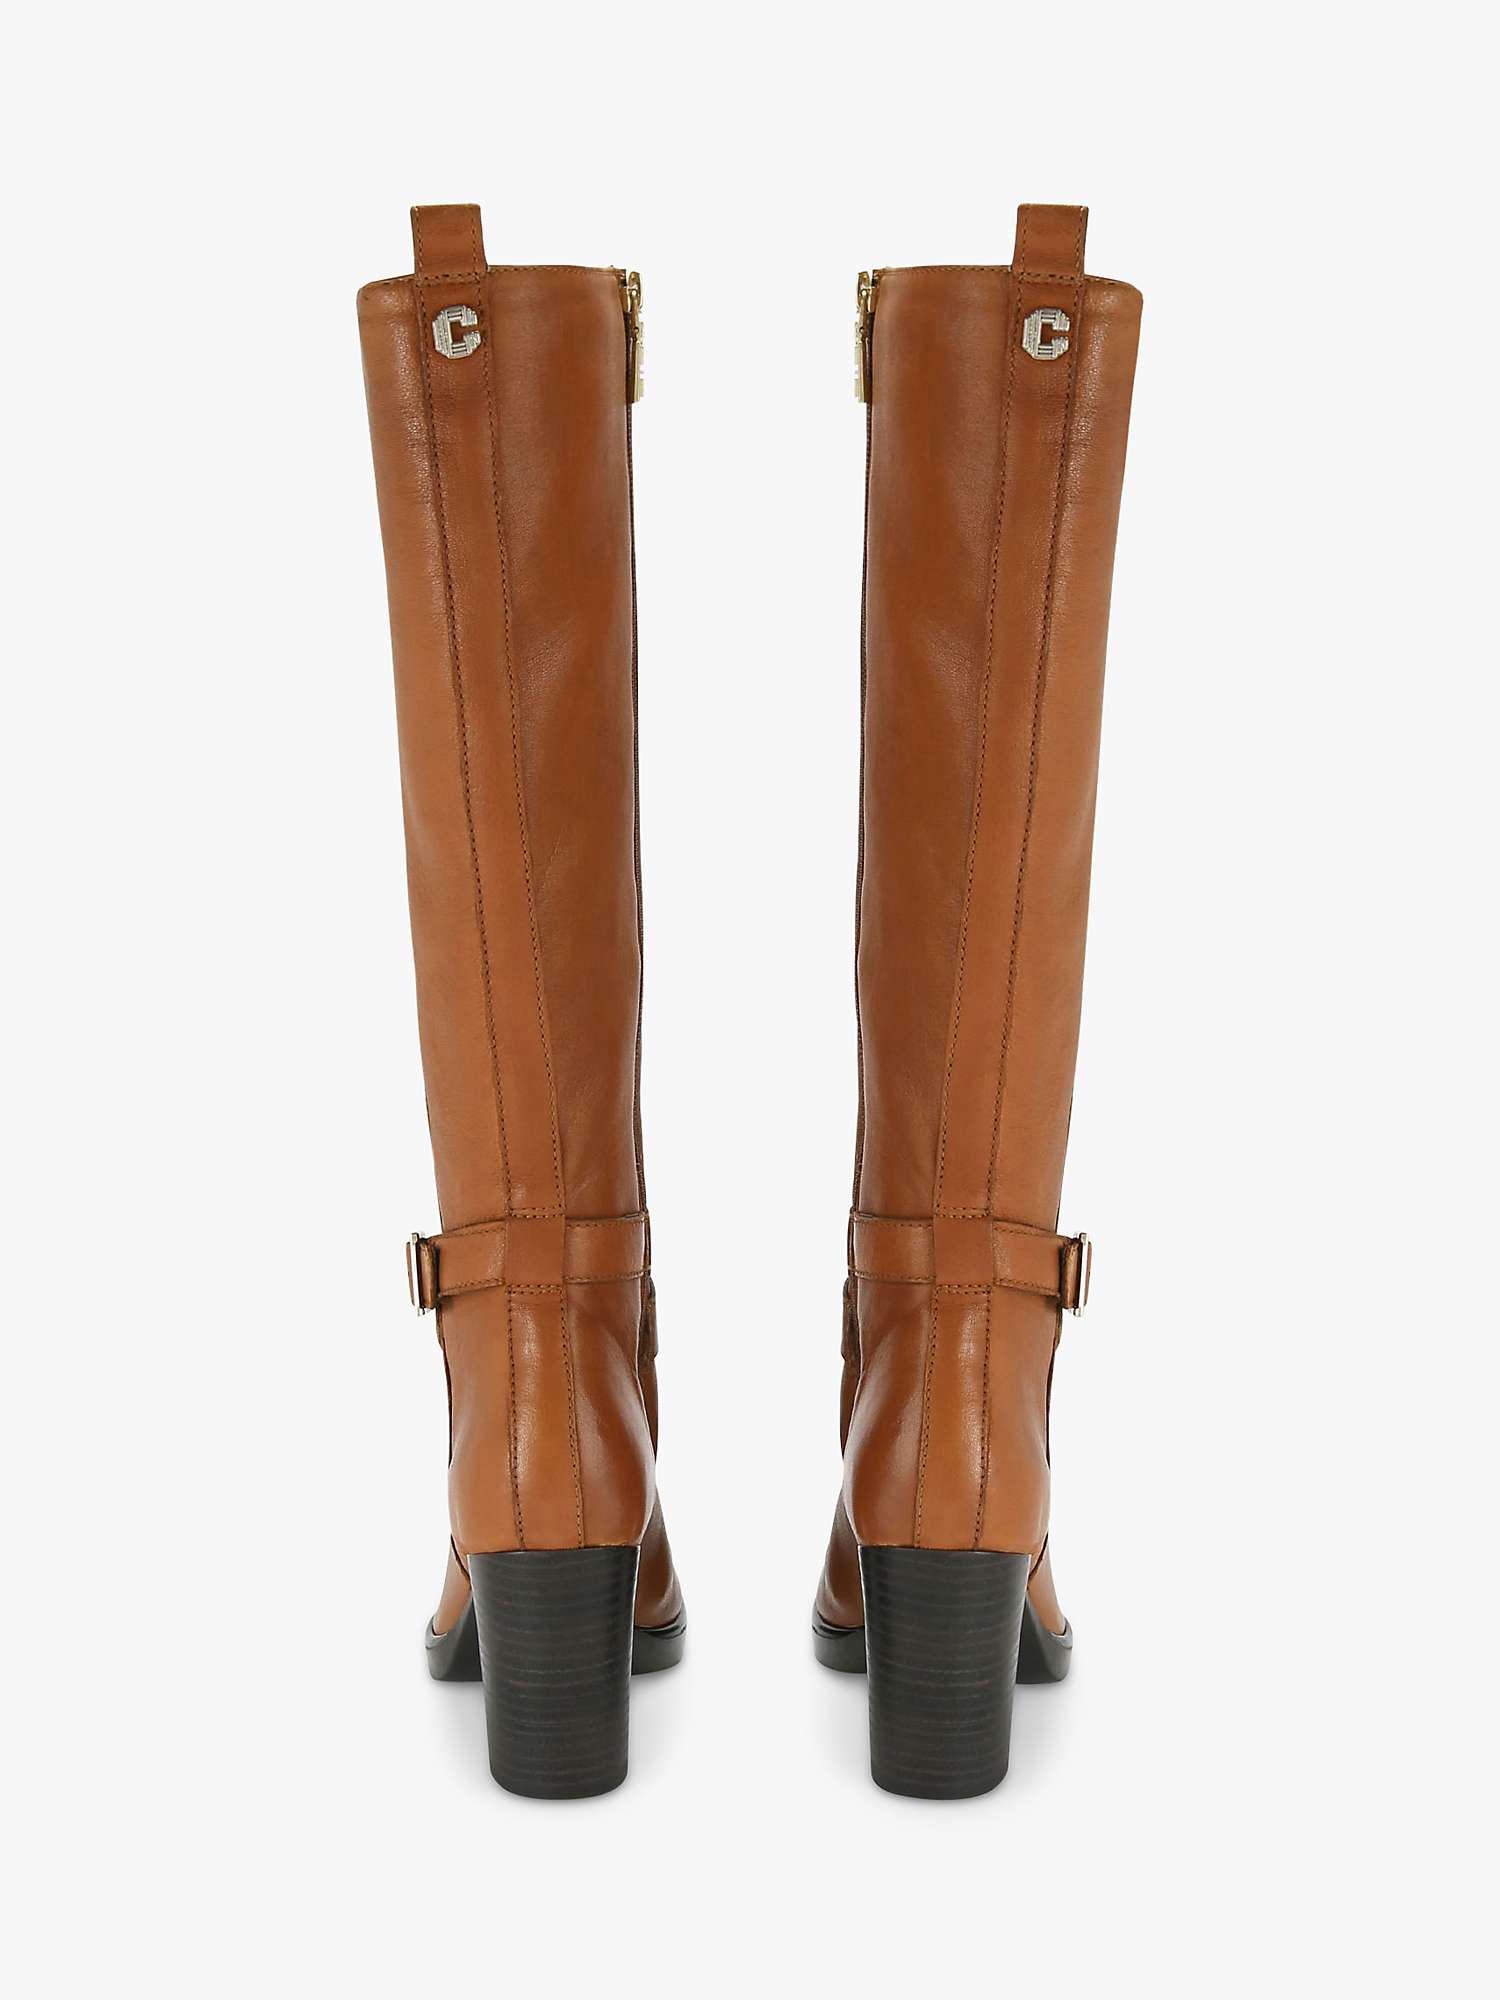 Buy Carvela Silver 2 Leather Knee High Boots, Brown Tan Online at johnlewis.com